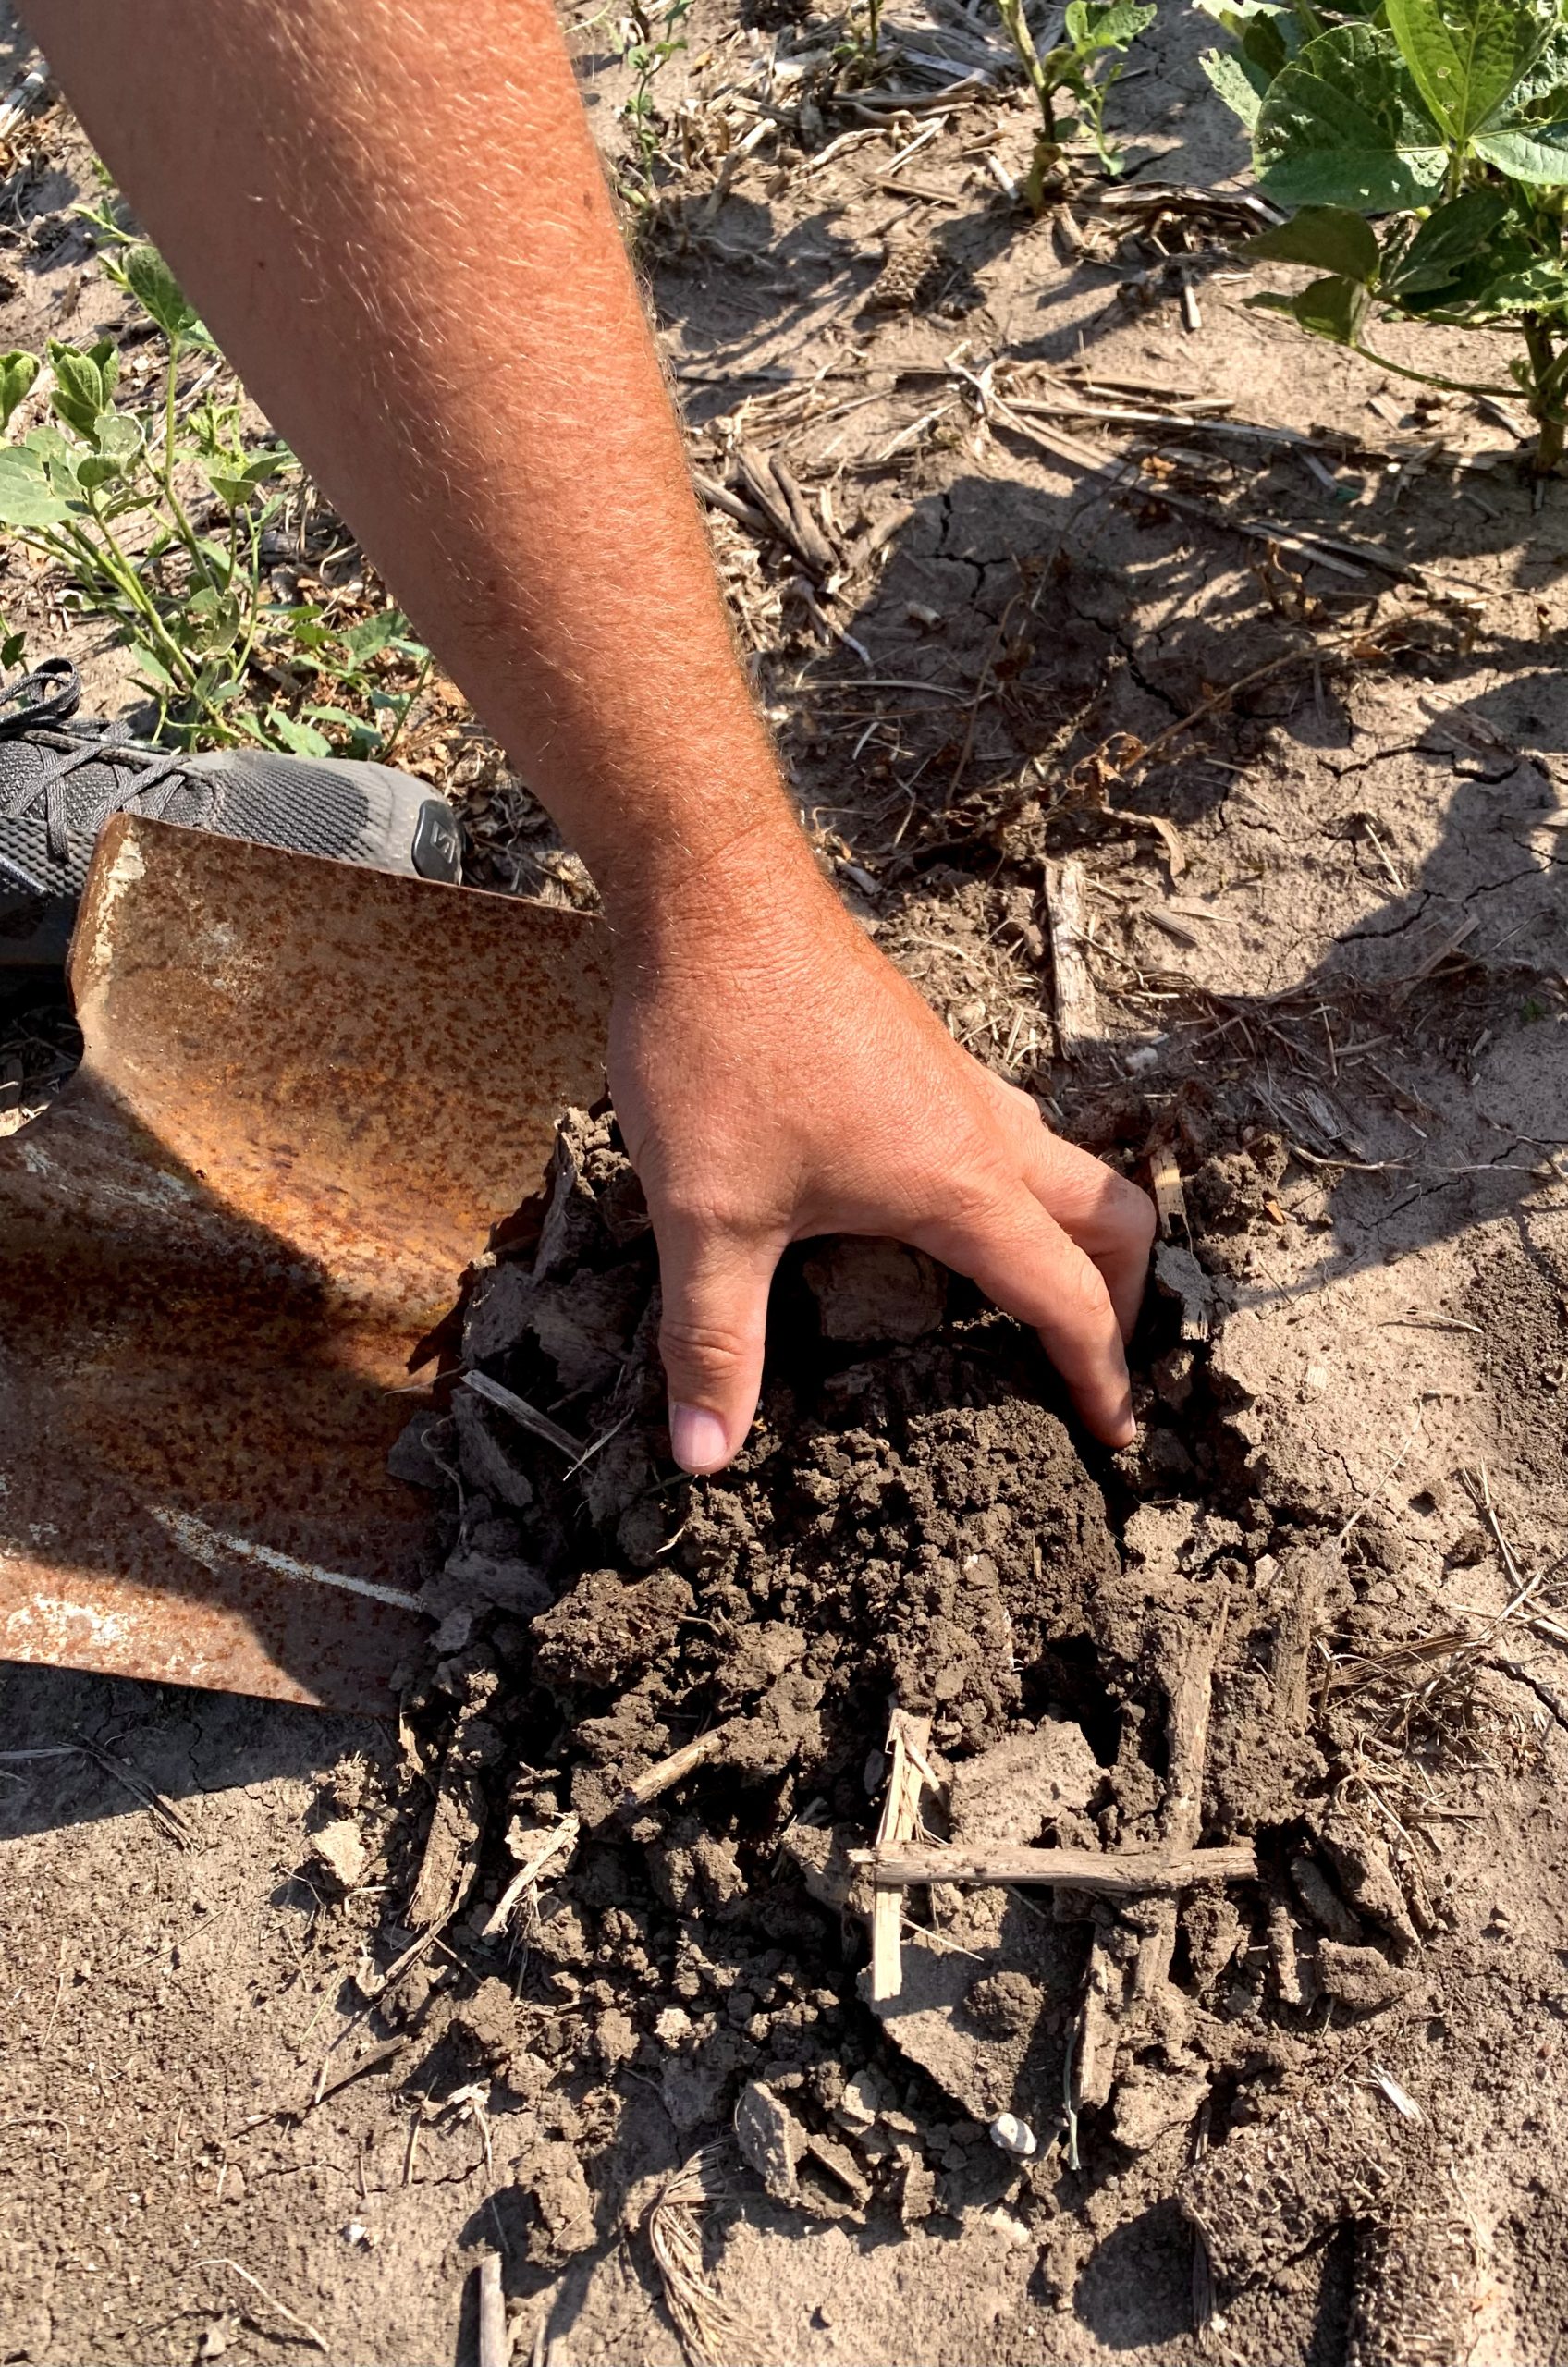 Improving soil health is a major focus of American agriculture these days, for its benefits in everything from growing food to sequestering carbon, and possibly playing a role in saving the planet. (Journal photo by Tim Unruh.)